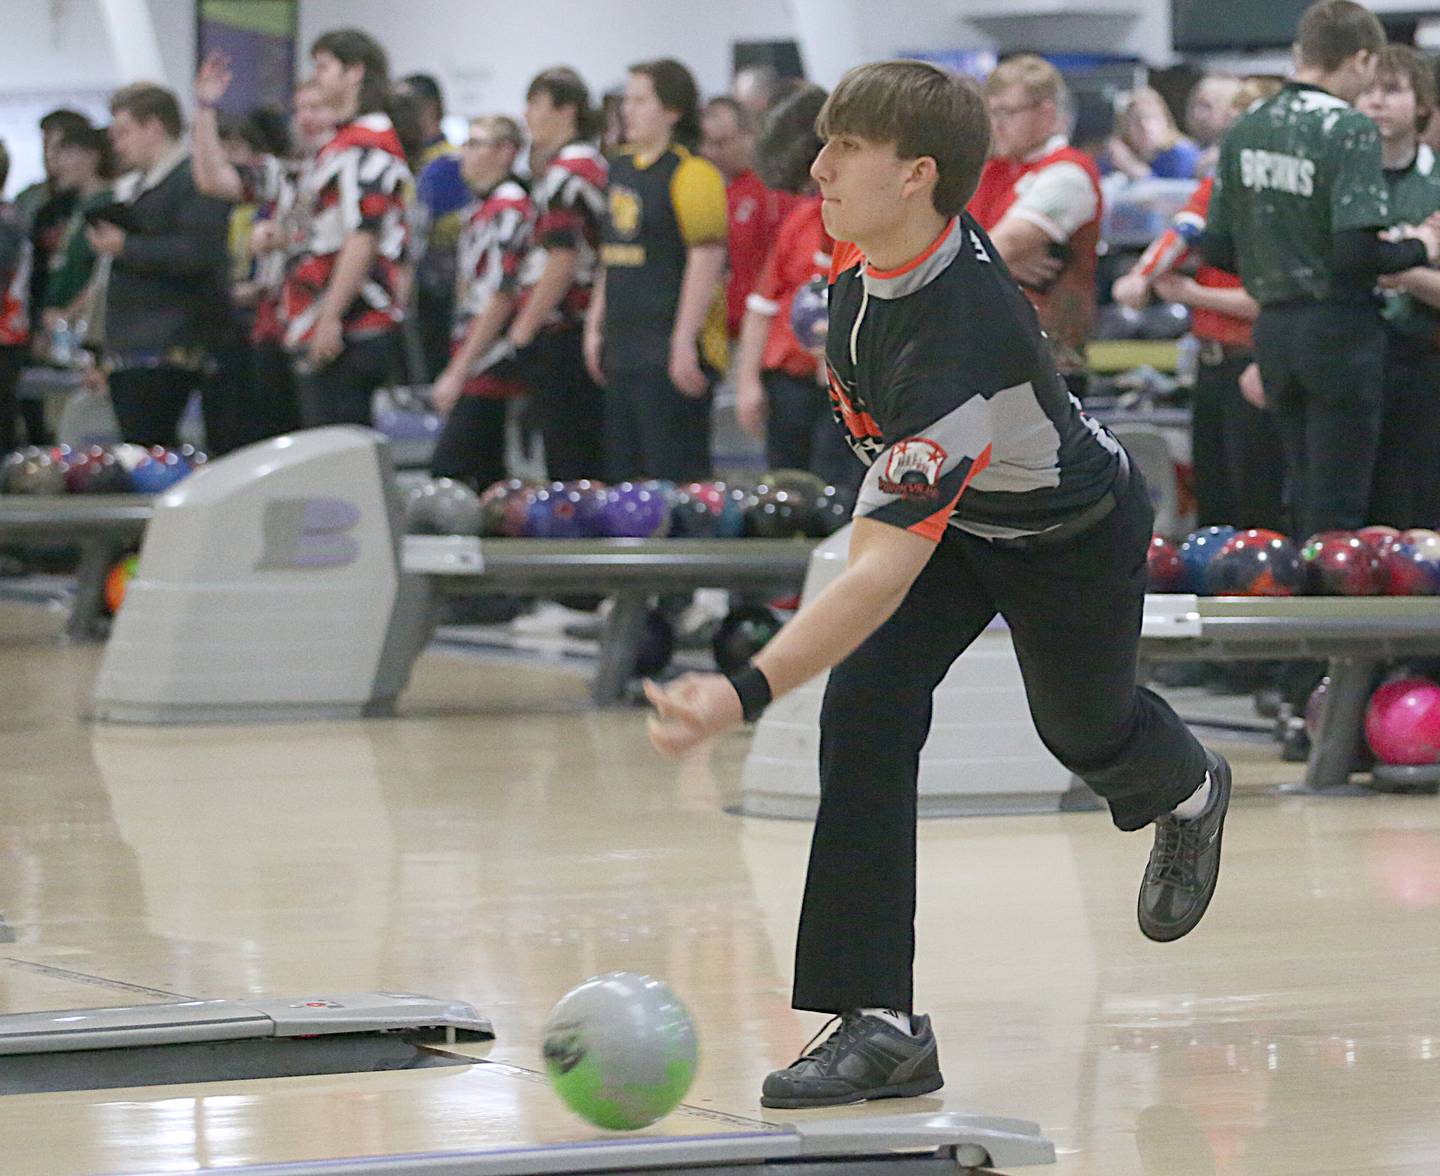 Yorkville's Andrew Lampinksas bowls in the Regional Bowling meet on Saturday, Jan. 14, 2023 at the Illinois Valley Super Bowl in Peru.